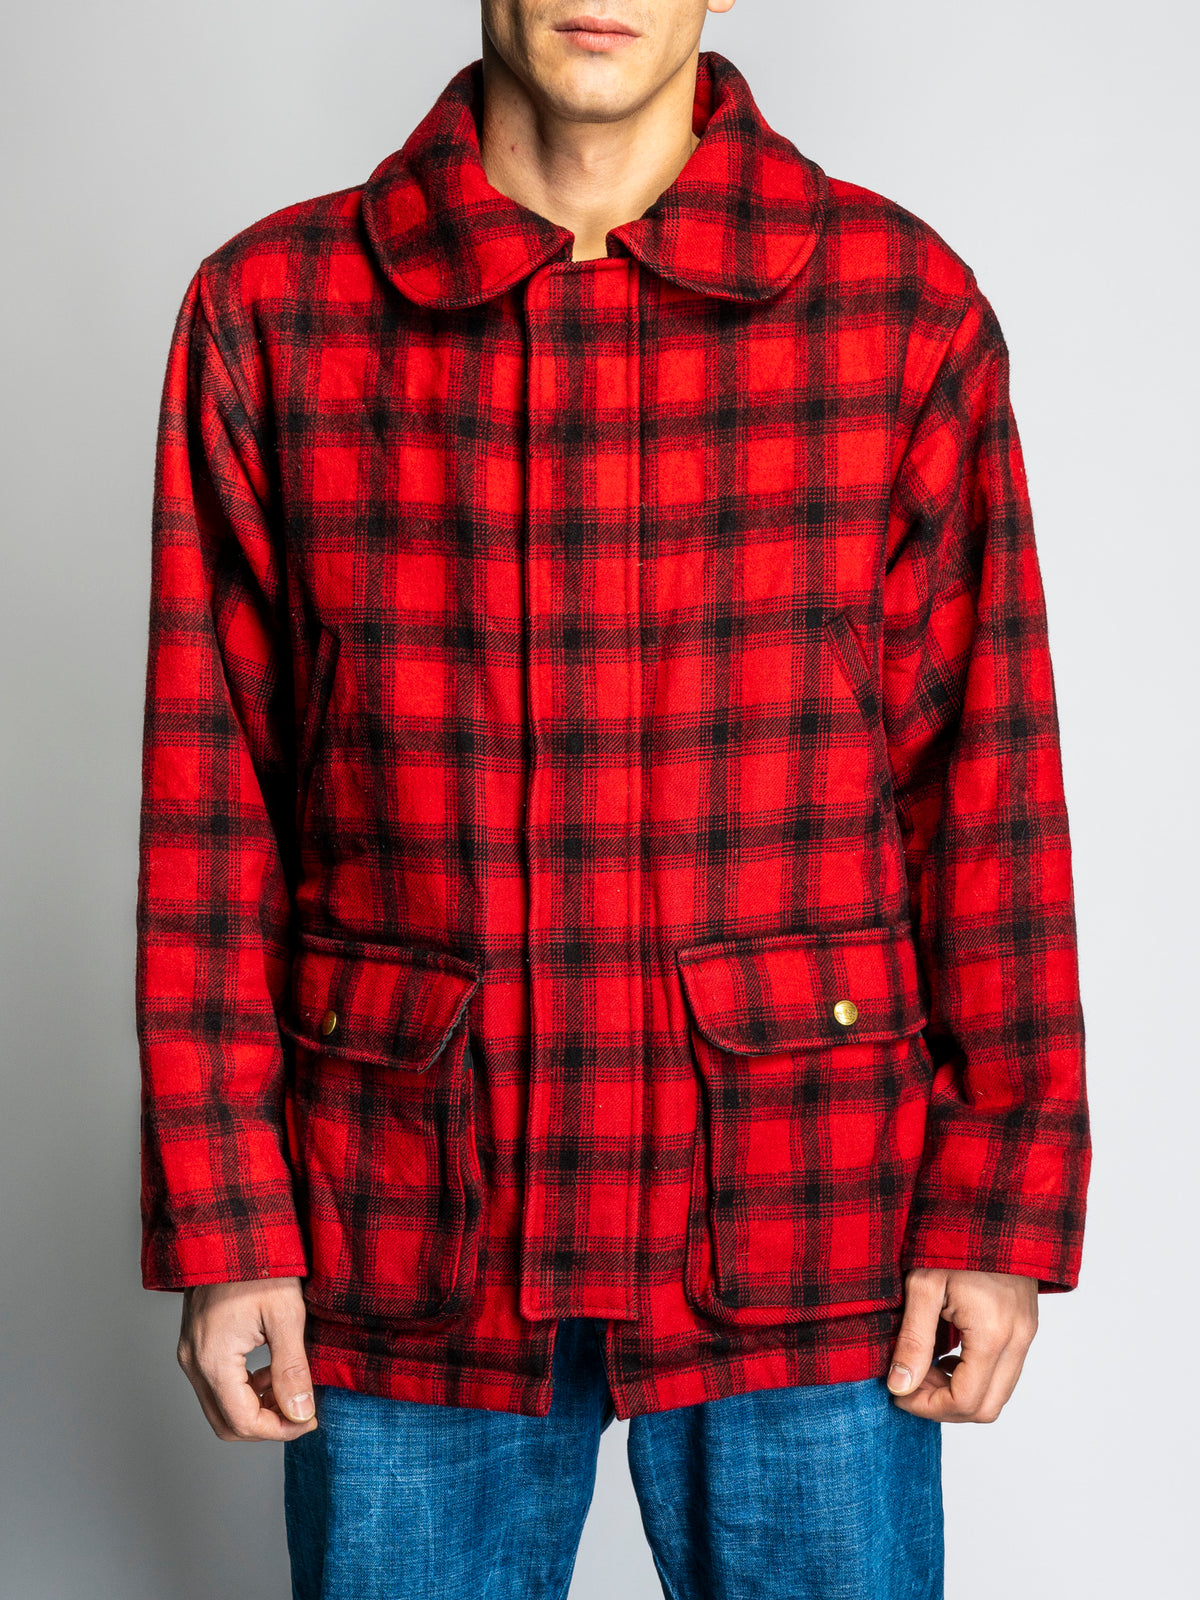 VINTAGE LL BEAN RED AND BLACK CHECKED JACKET 